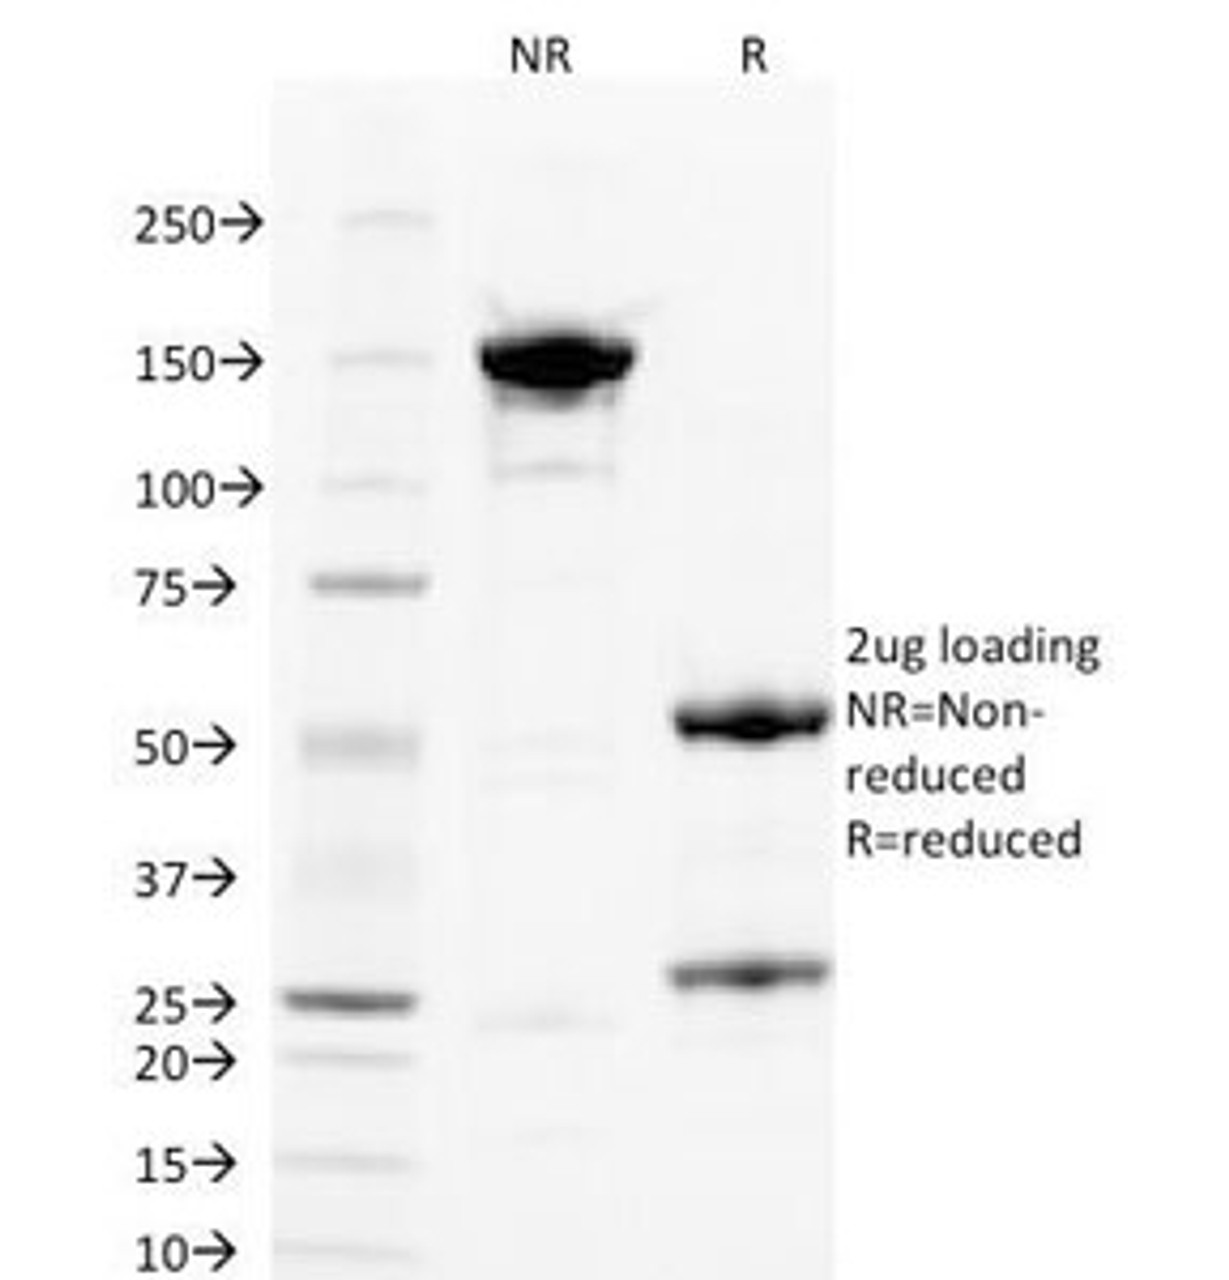 SDS-PAGE Analysis of Purified, BSA-Free PLGF Antibody (clone PLGF/93) . Confirmation of Integrity and Purity of the Antibody.